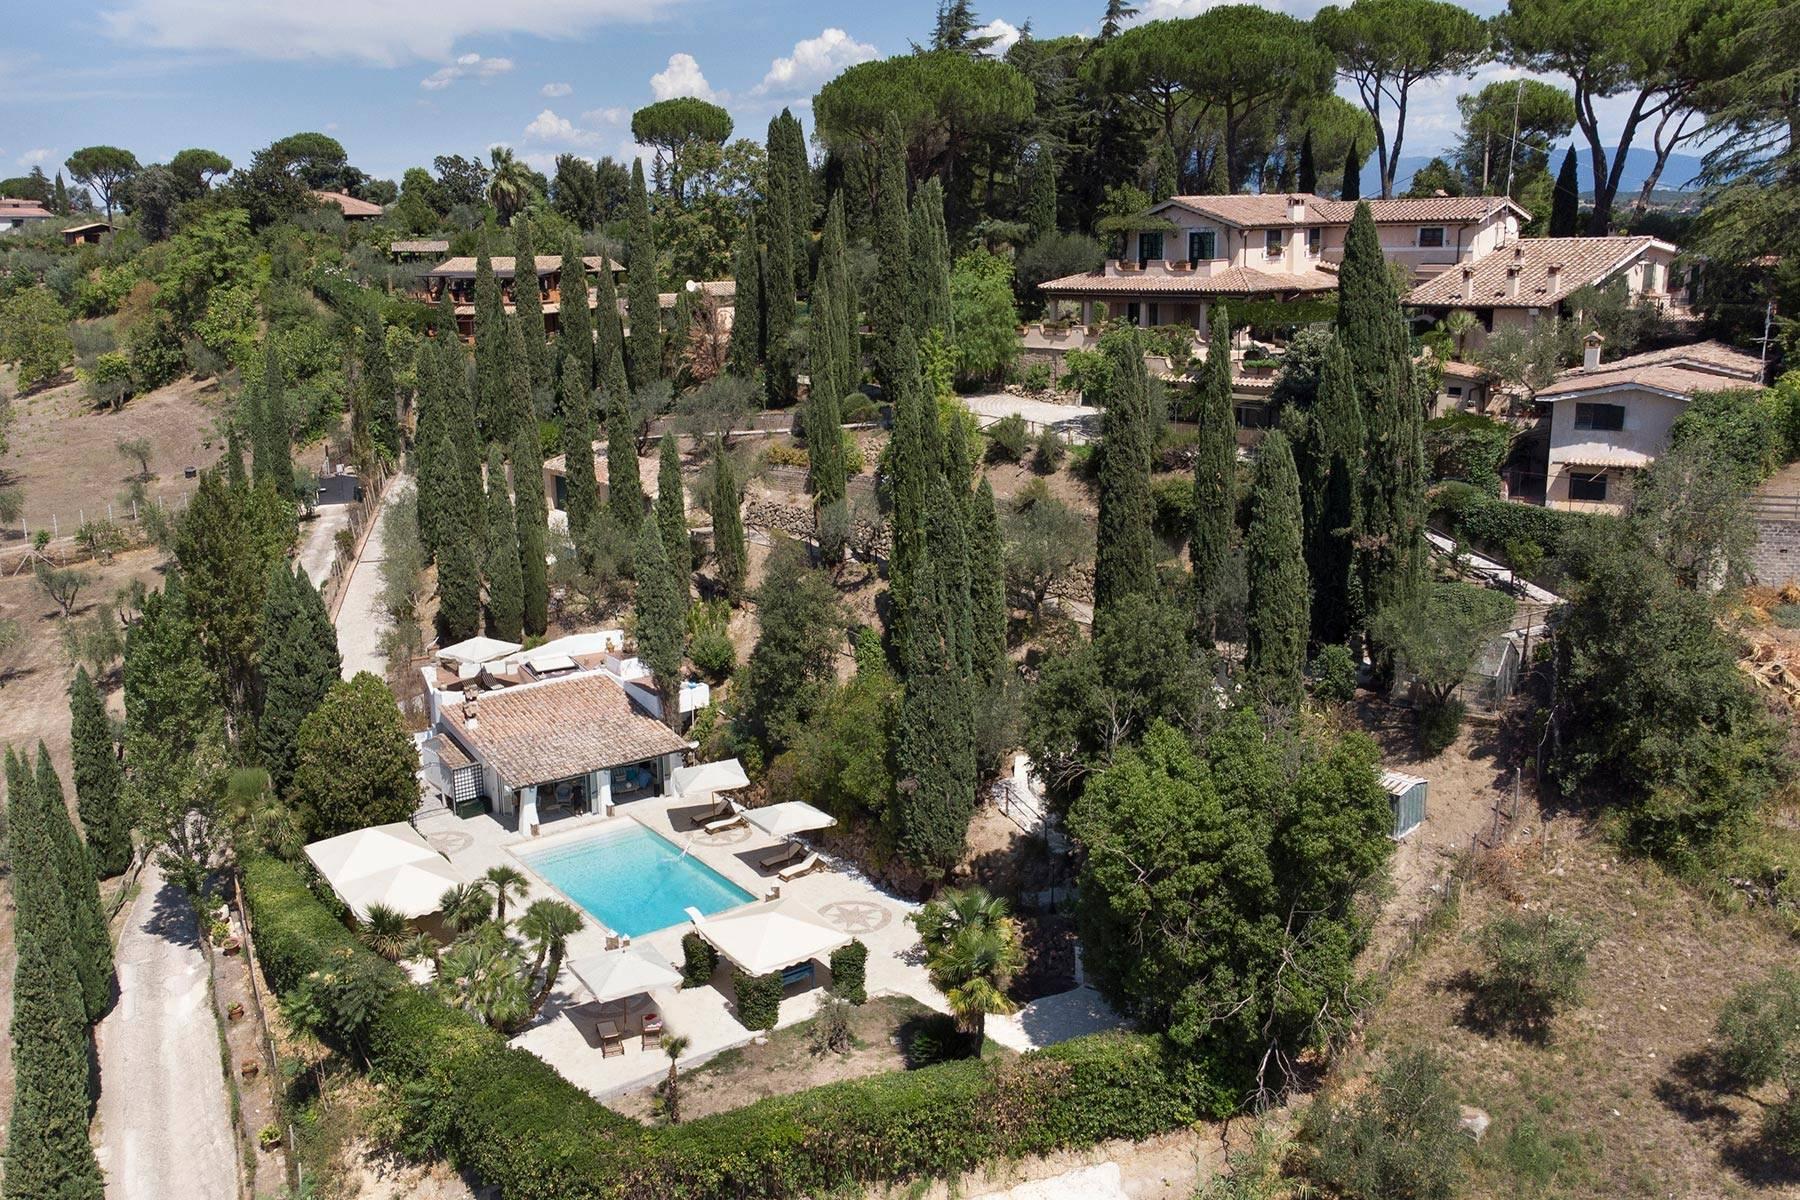 Villa Nayara - Lovely mansion with swimming pool 30 minutes from Rome - 3